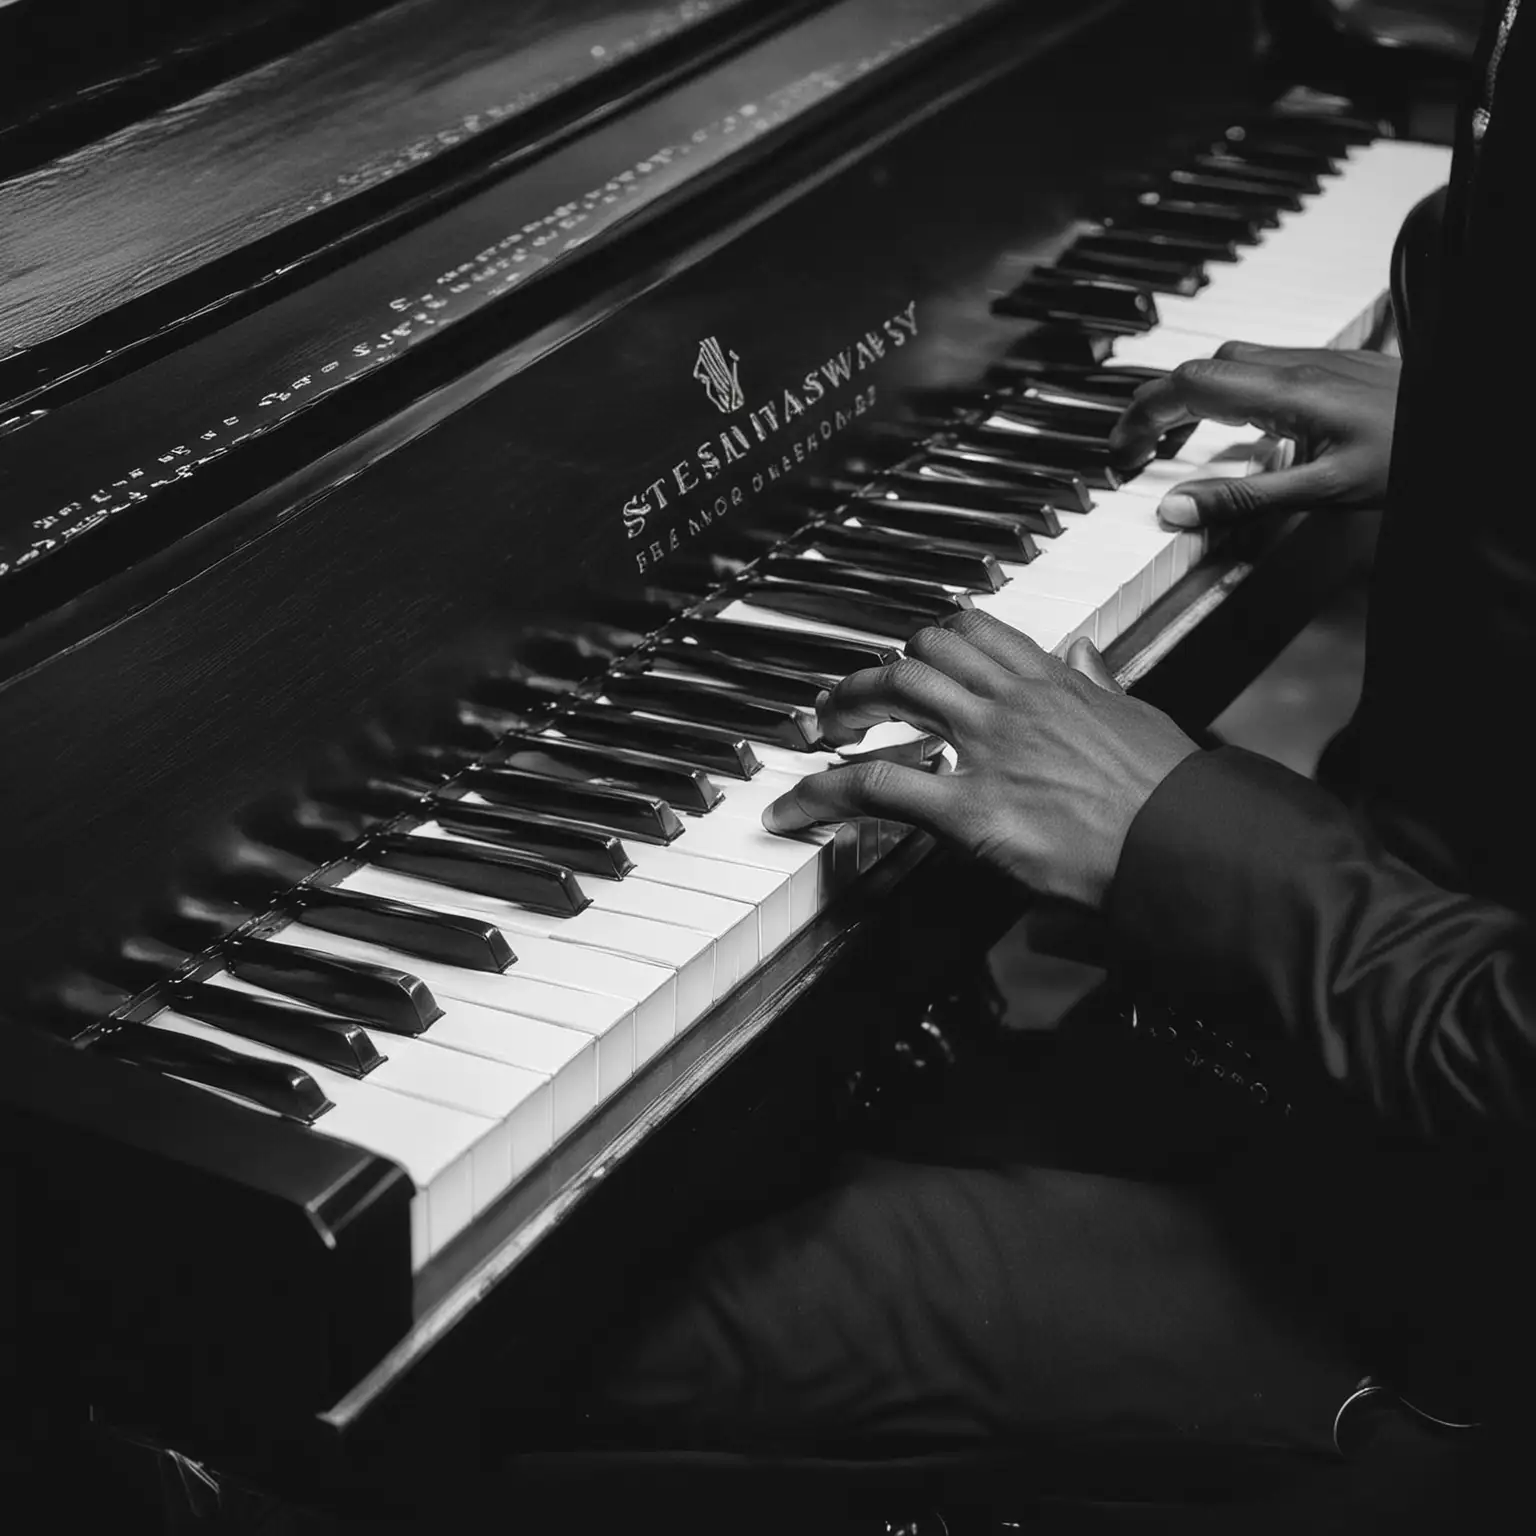 Black musician hands playing the keys on a steinway piano black and shite not color

